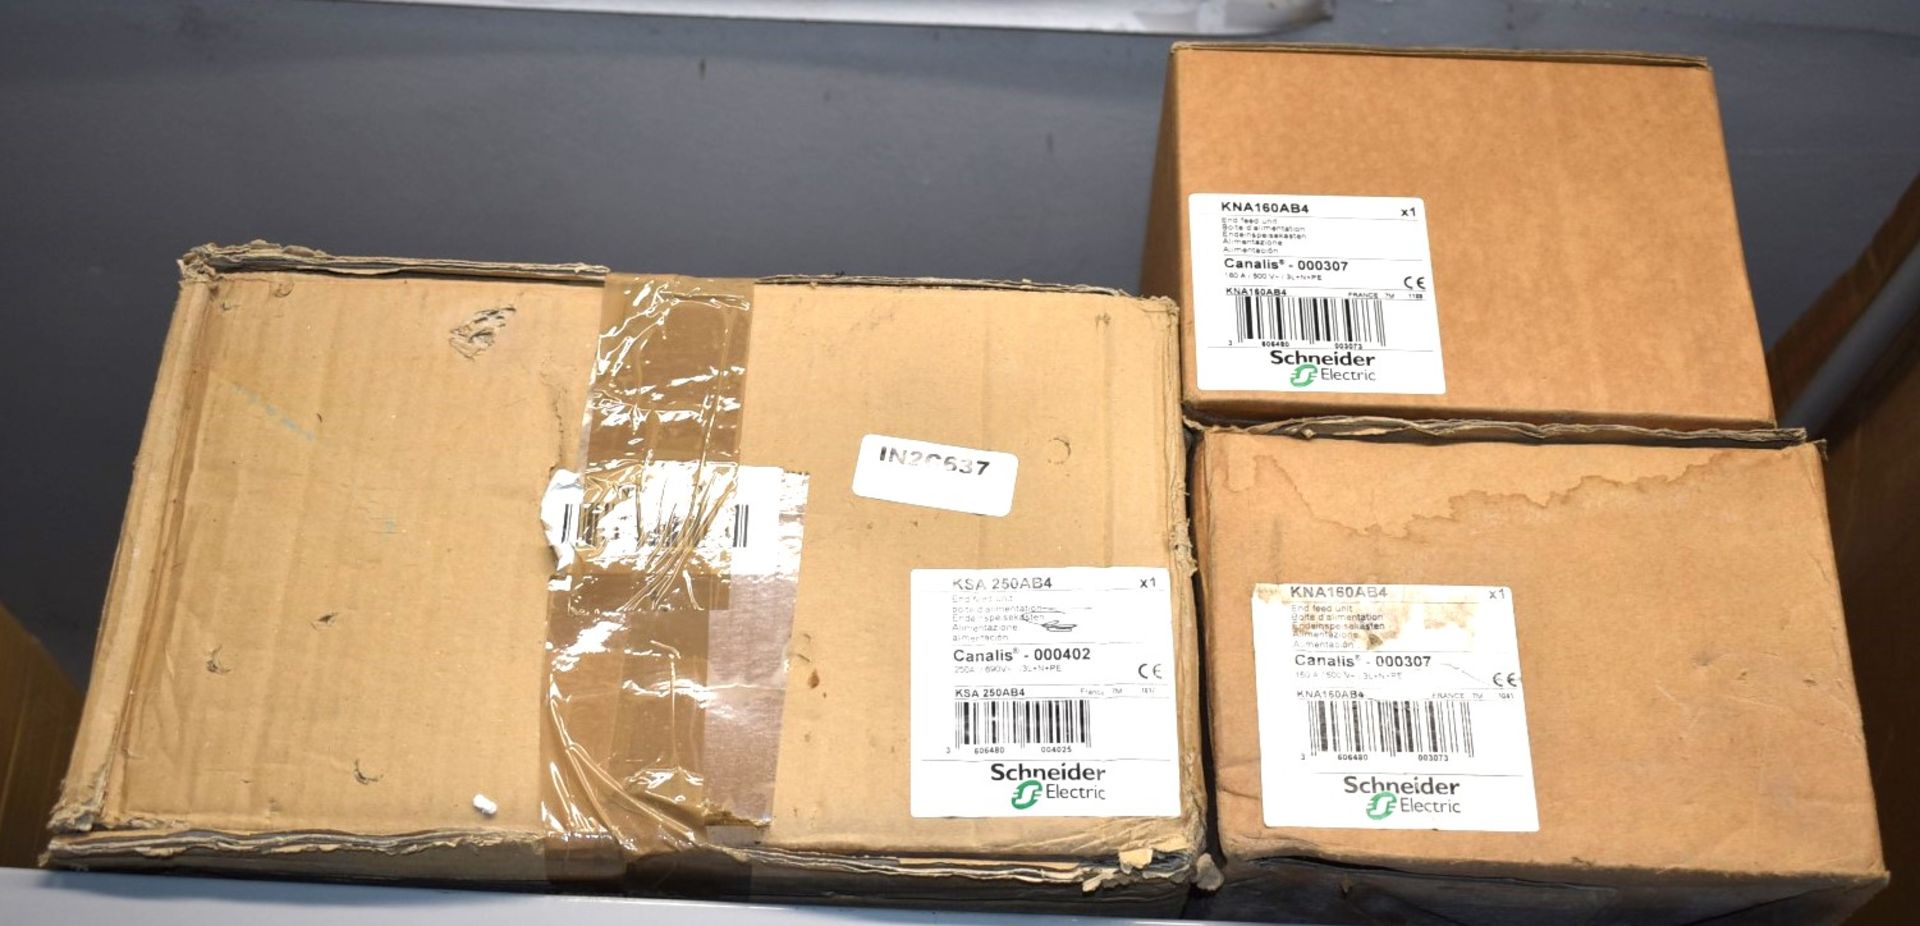 3 x Schneider Electric Canalis End Feed Units - Types KSA250AB4 & KNA160AB4 - RRP £1,360 - Image 5 of 7